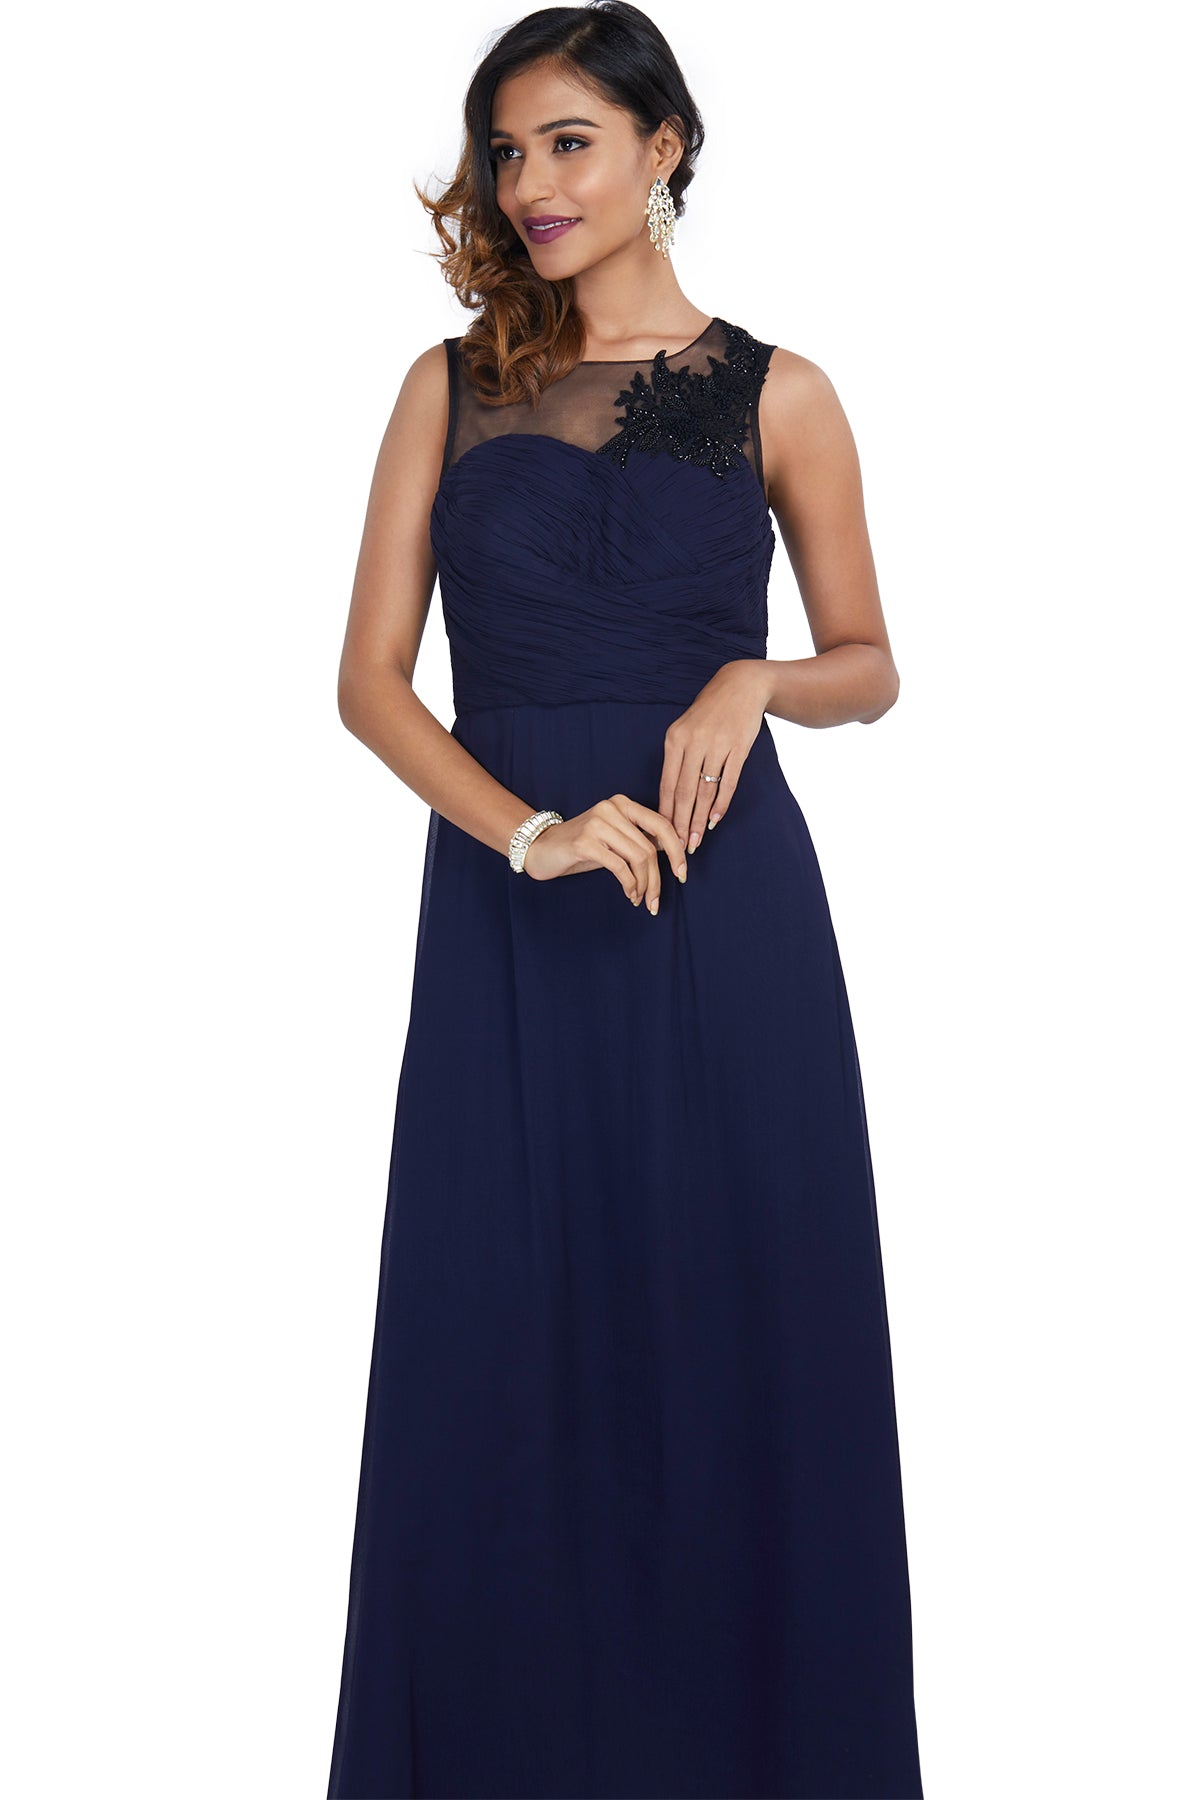 We wouldn't be surprised if he blew you a kiss in this regal navy blue gown finished with a black sweet-heart neck with floral patchwork. 
